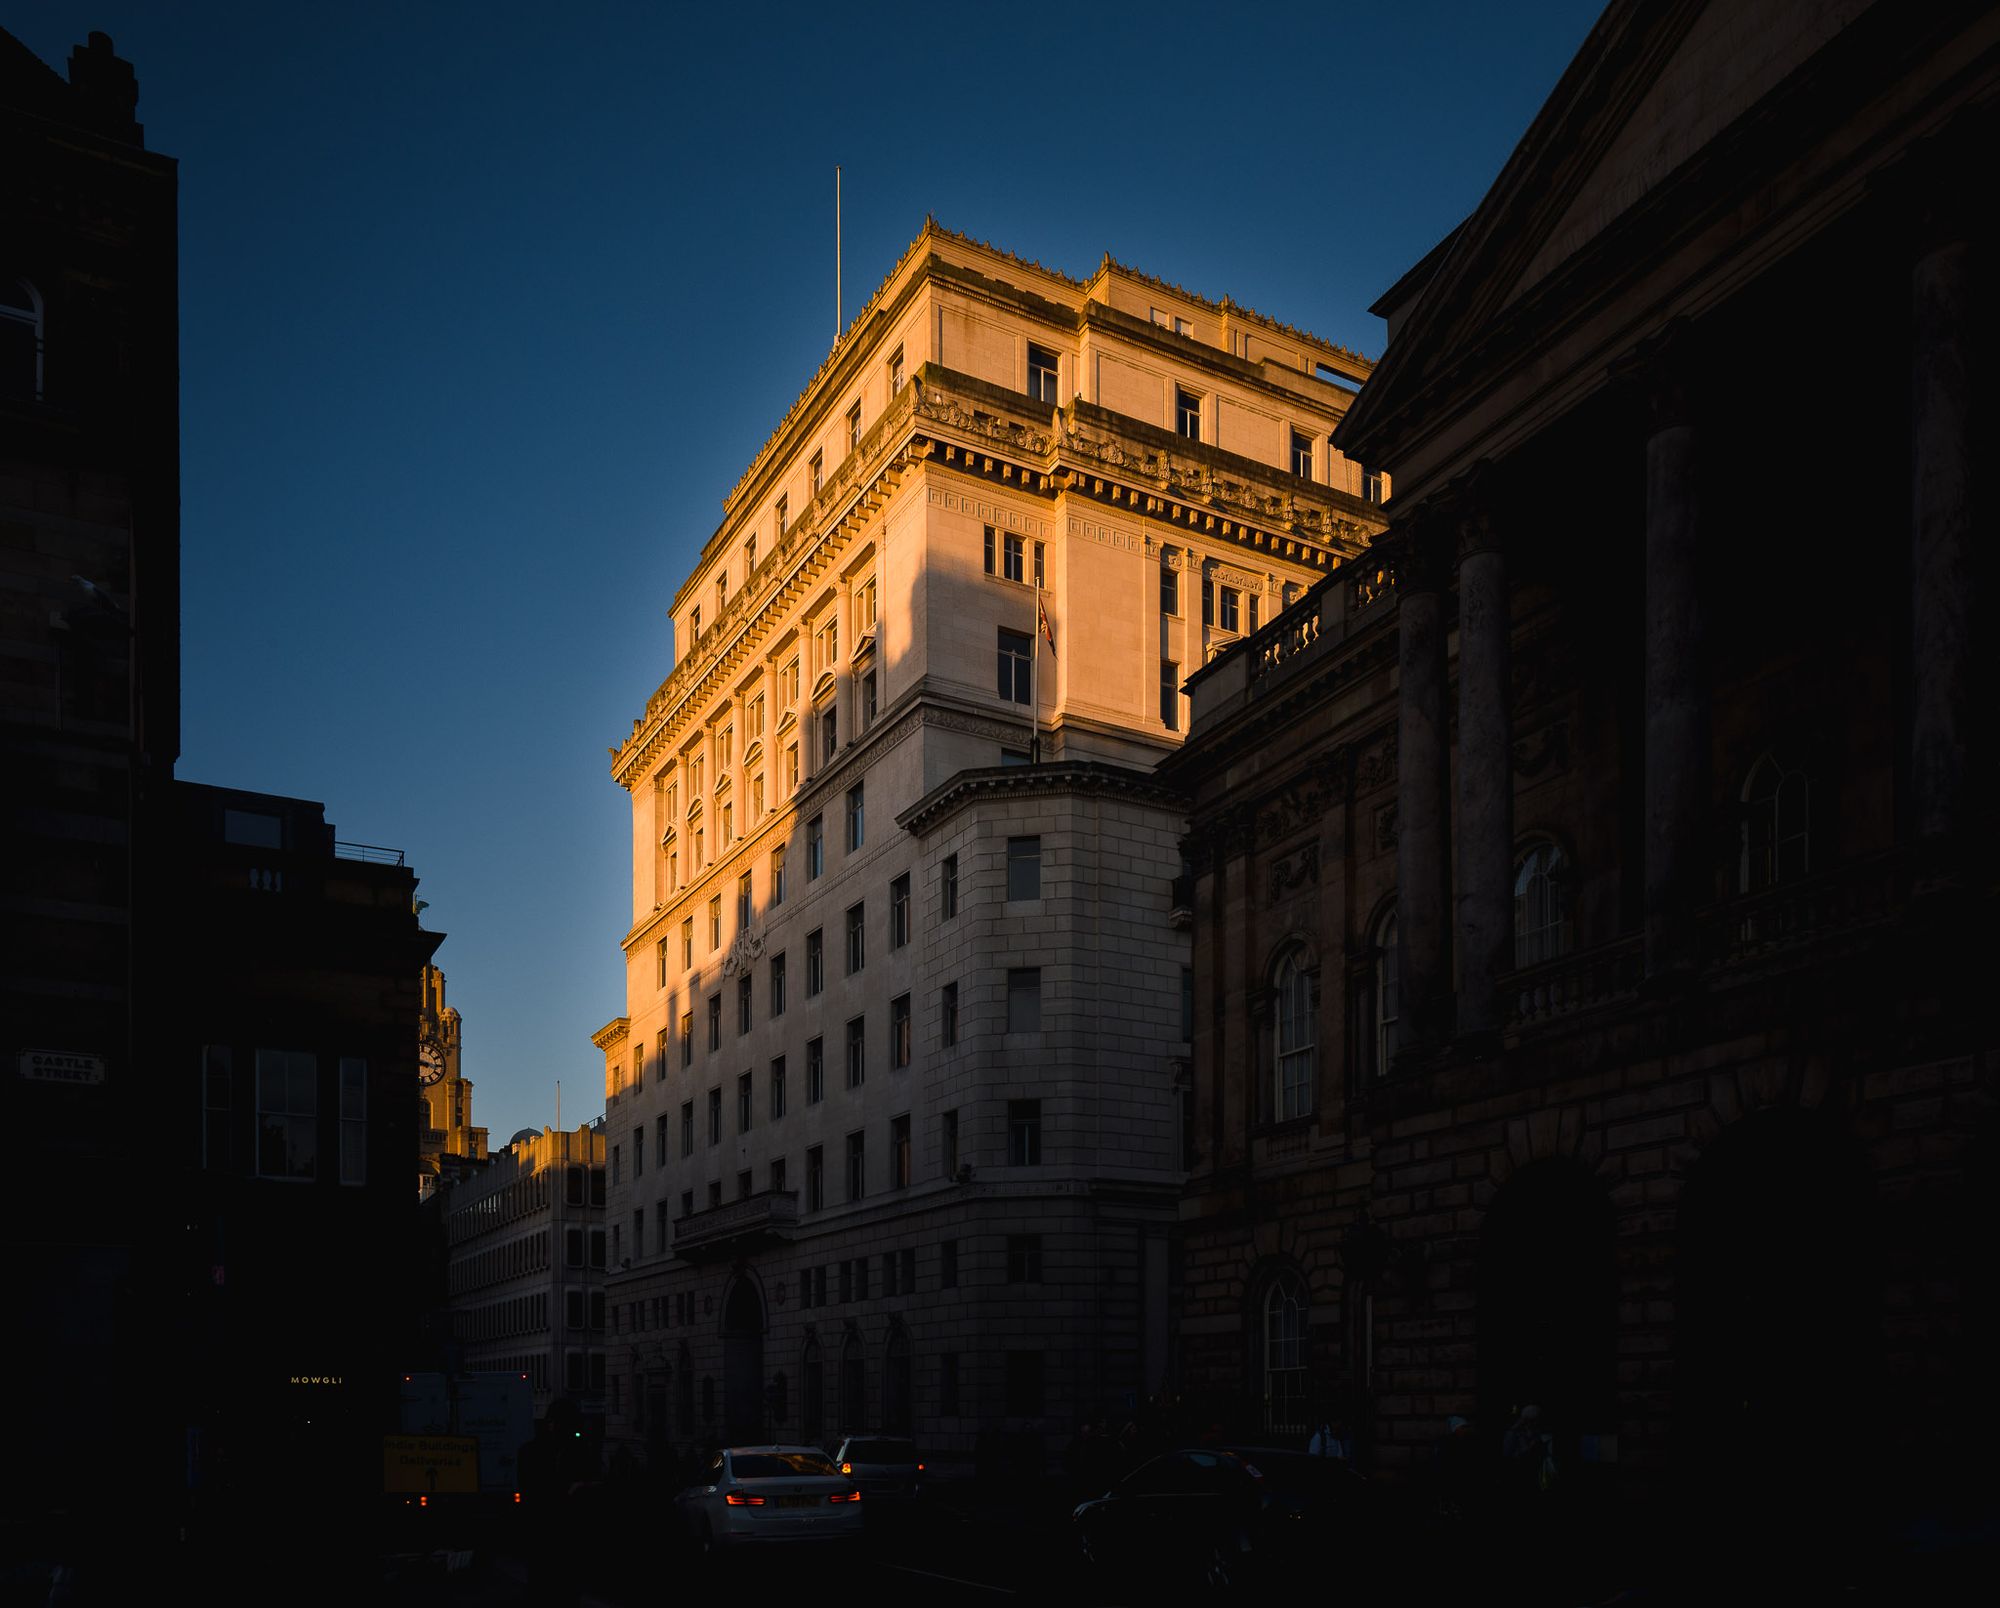 Martin's Bank glowing in the early morning sunshine.